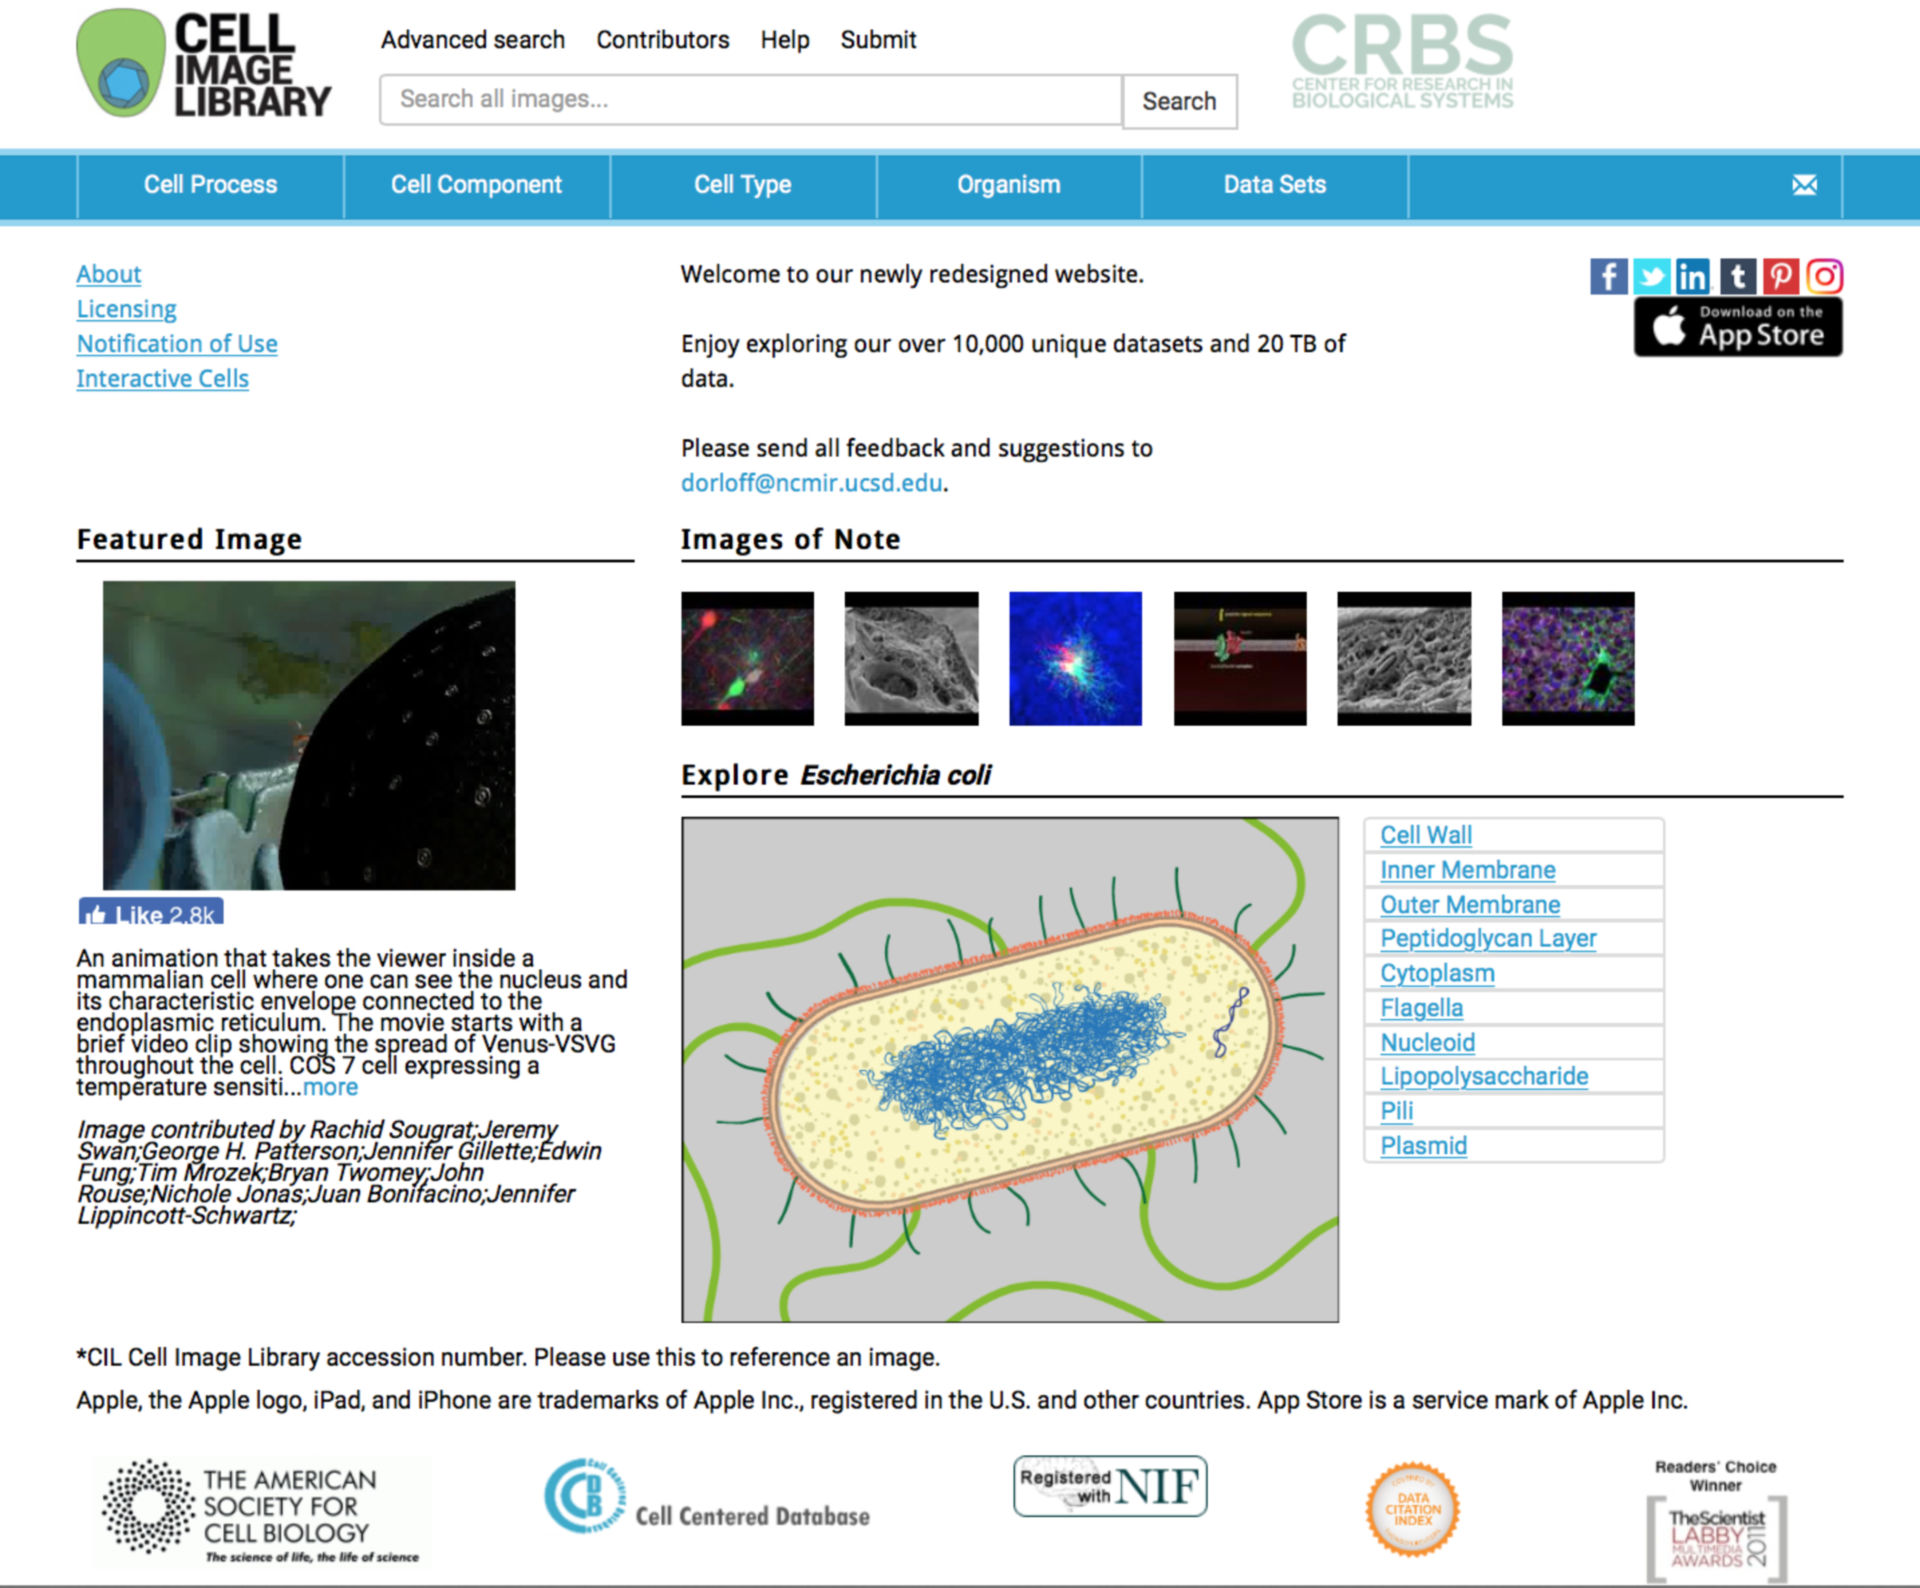 NEW! The Cell Image Library launches new design – January 29, 2018 - http://www.cellimagelibrary.org